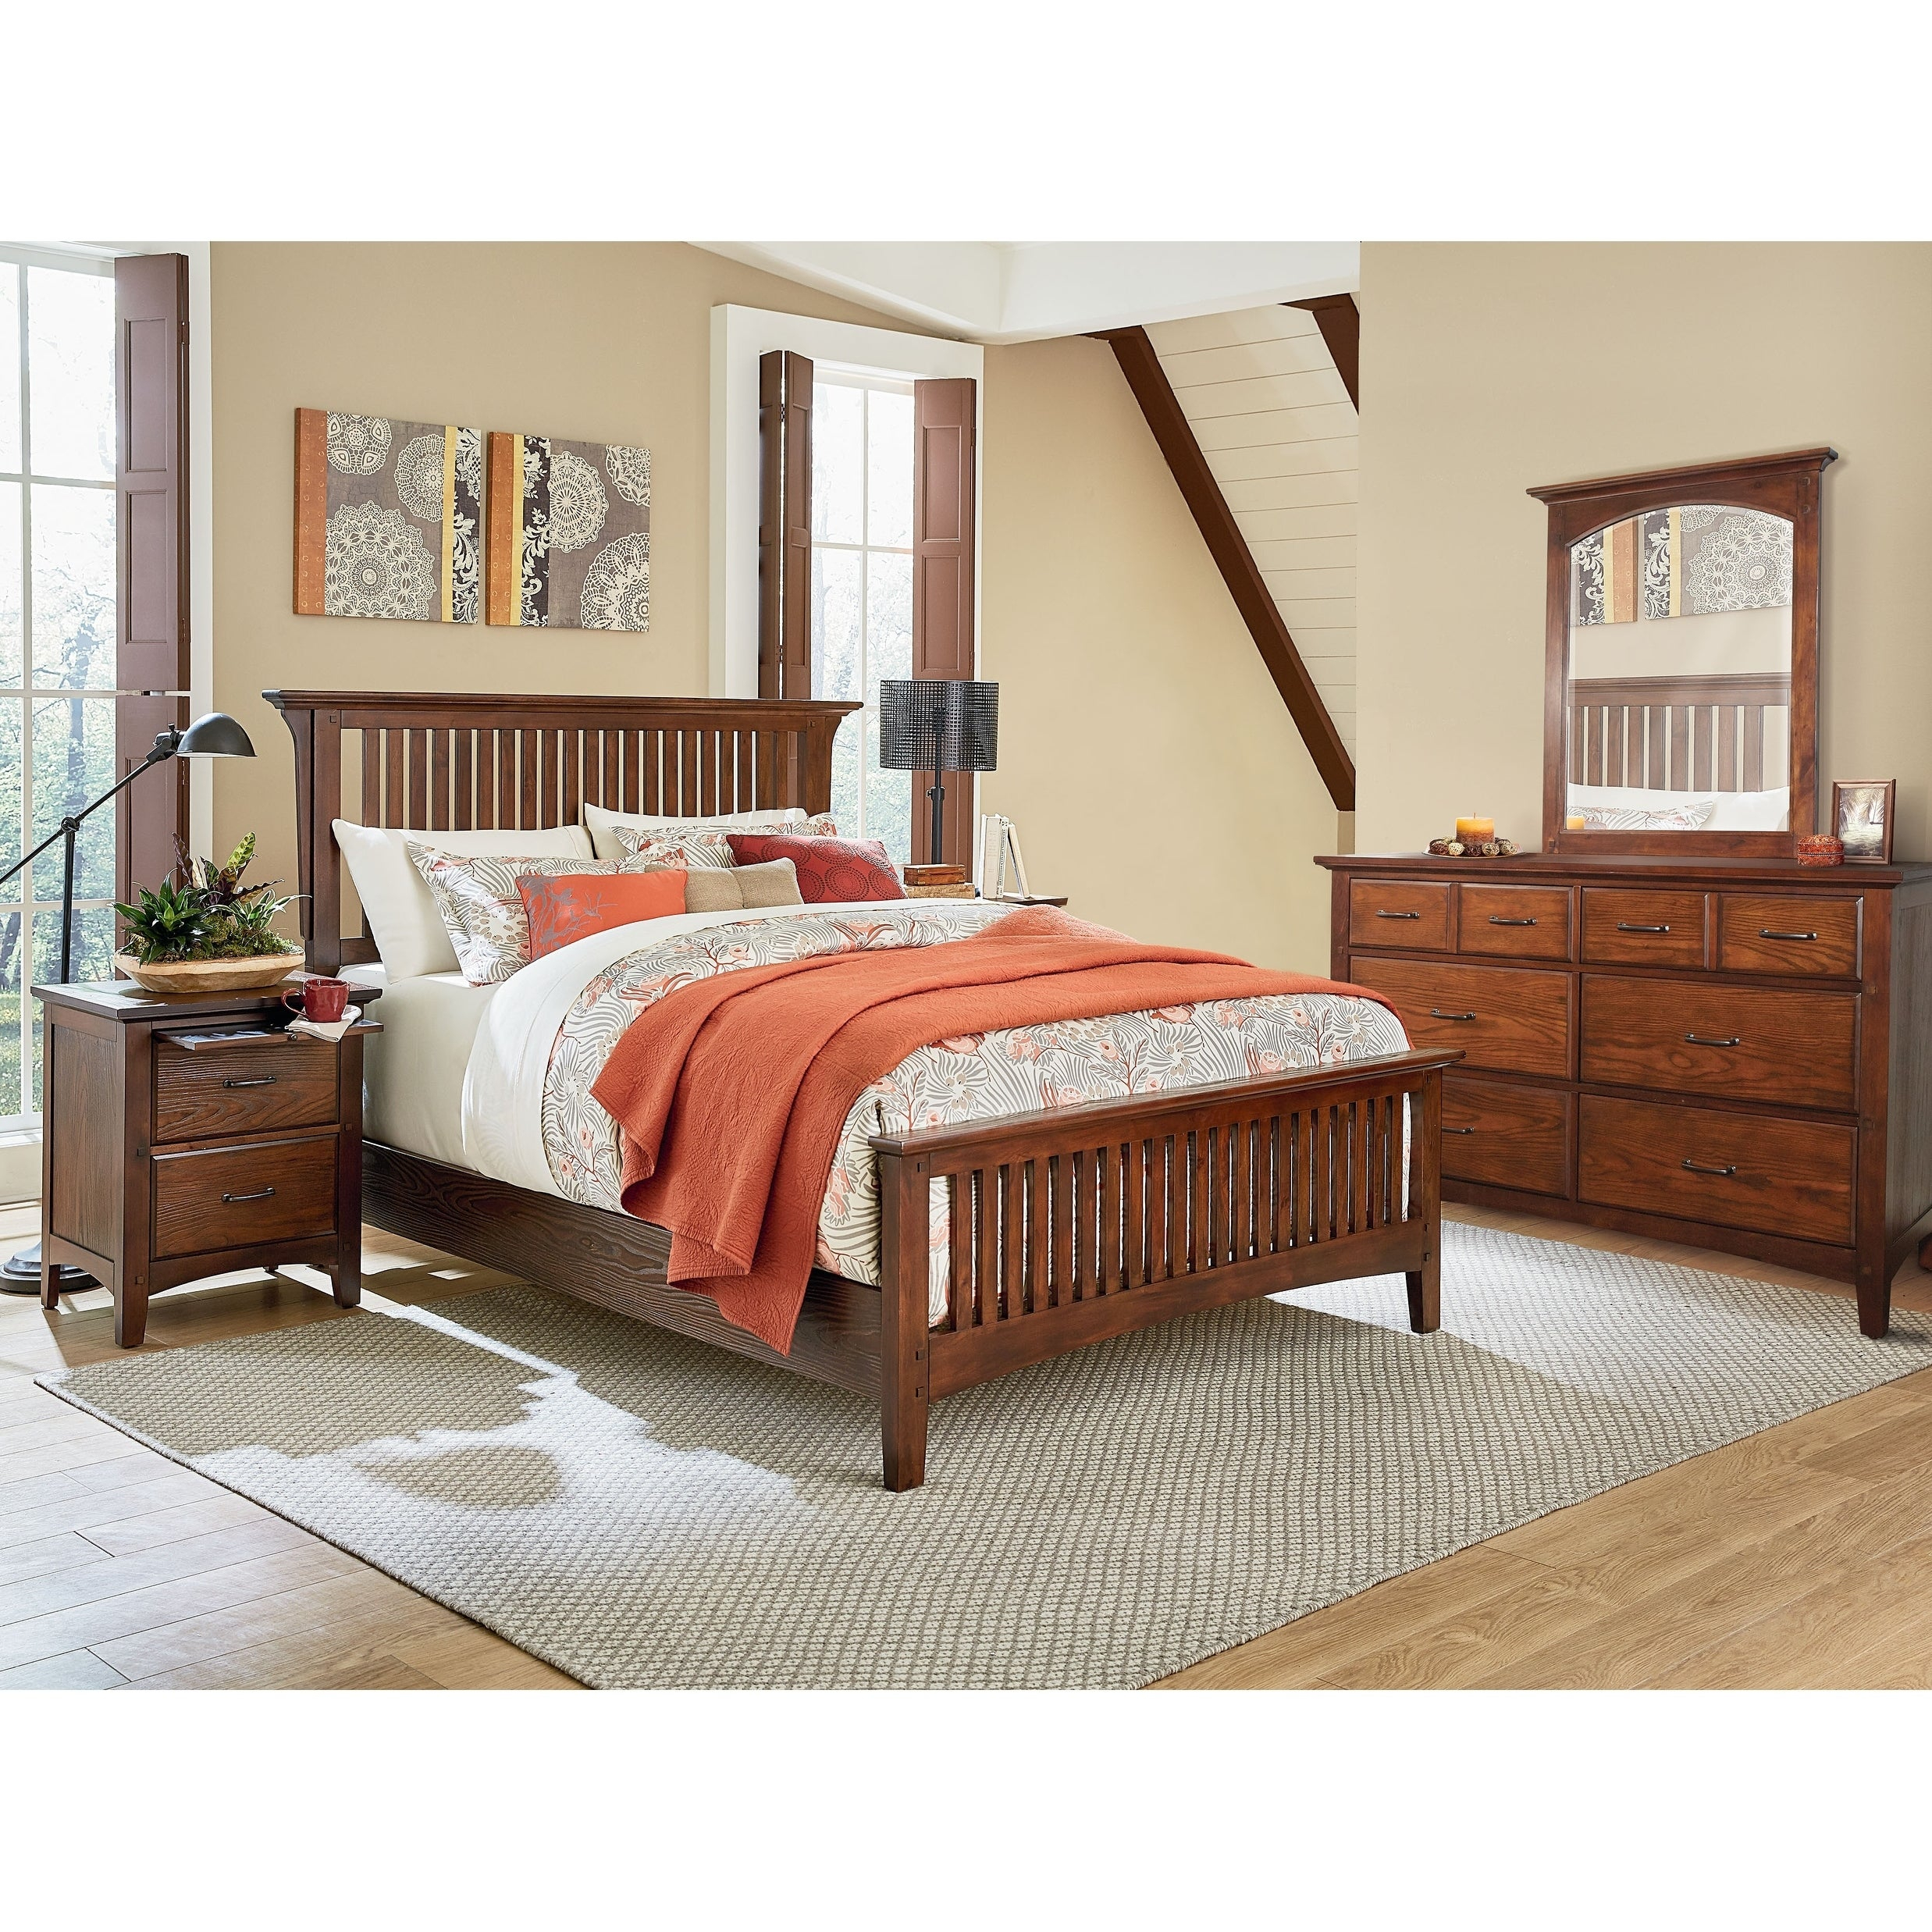 Osp Home Furnishings Modern Mission Queen Bedroom Set With 2 Nightstands And 1 Dresser With Mirror pertaining to size 2475 X 2475